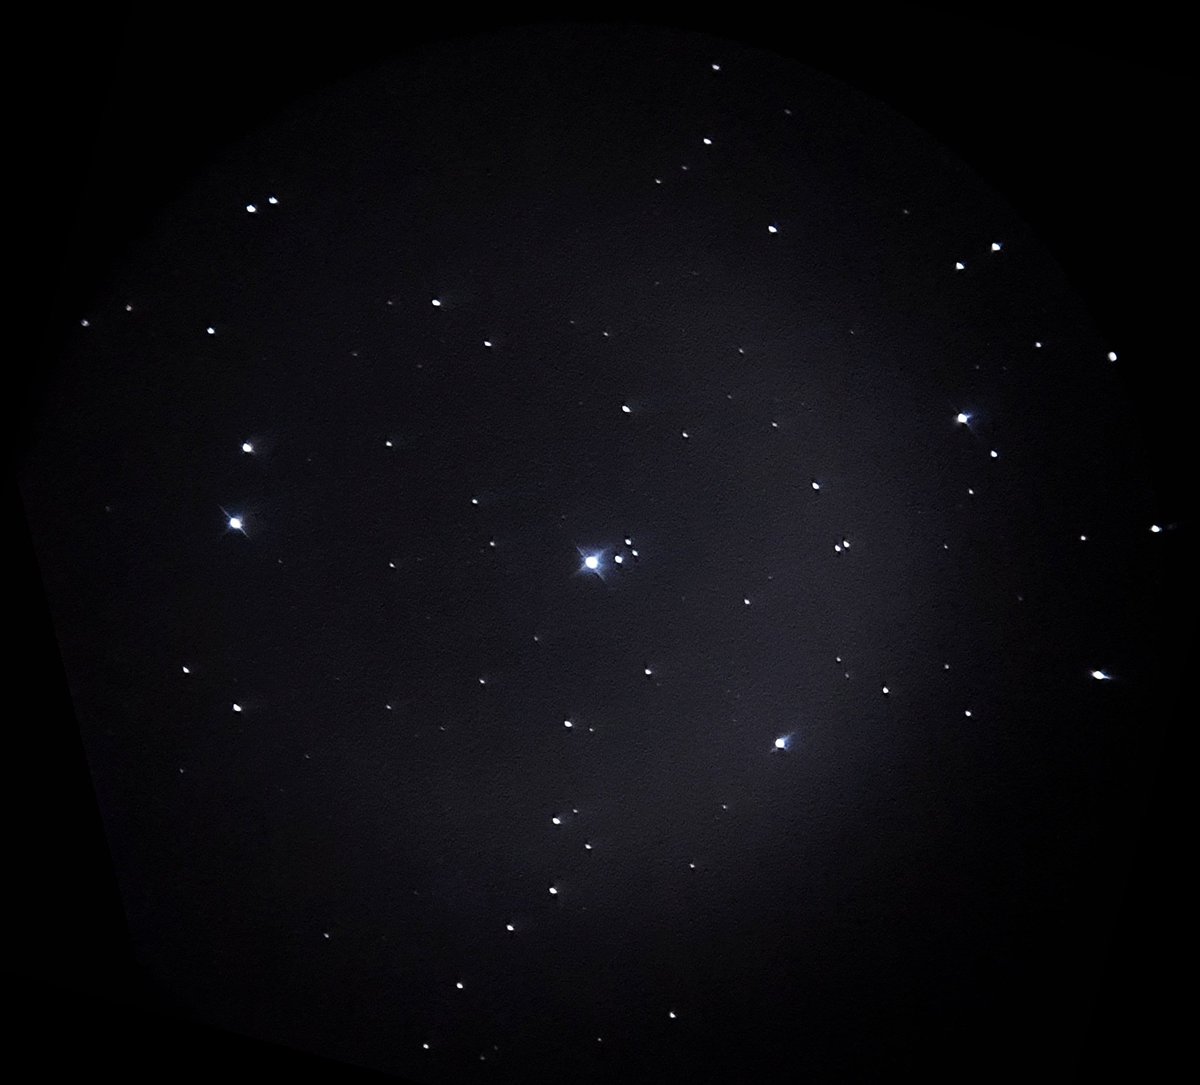 The seven sisters of the Pleiades open star cluster. Untracked 4 seconds exposure with 8' Dob scope, 40mm 'wide' lens and Samsung mobile #Astrophotography #Astronomy #AstroHour